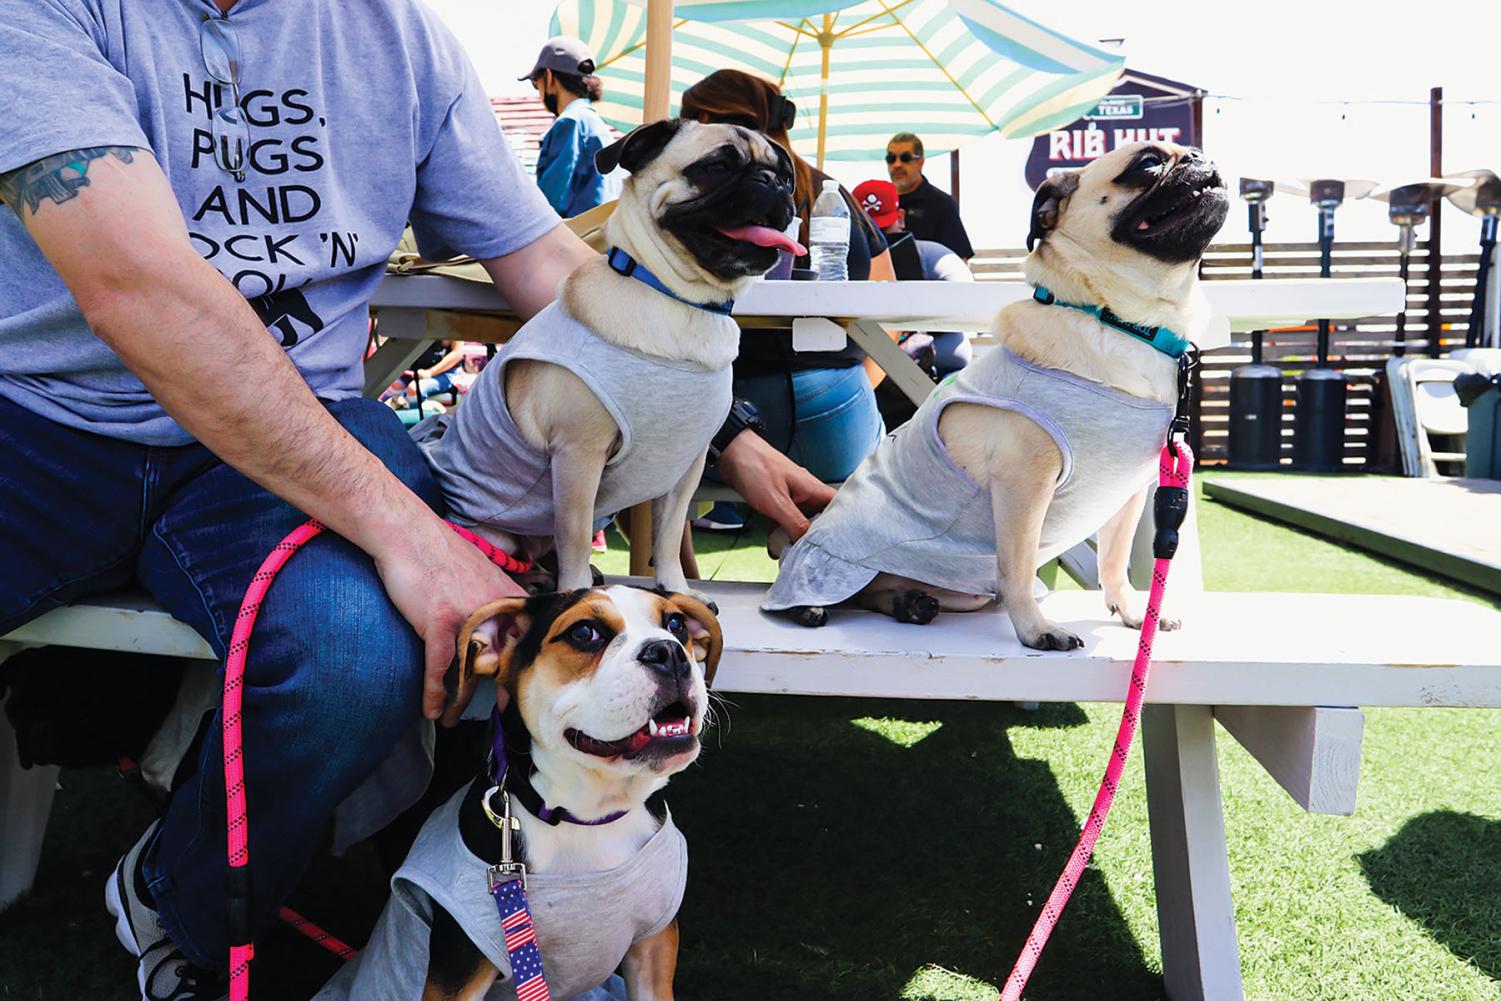 Photo+gallery%3A+Pugchella+brings+festivities+and+relaxation+for+pug+owners